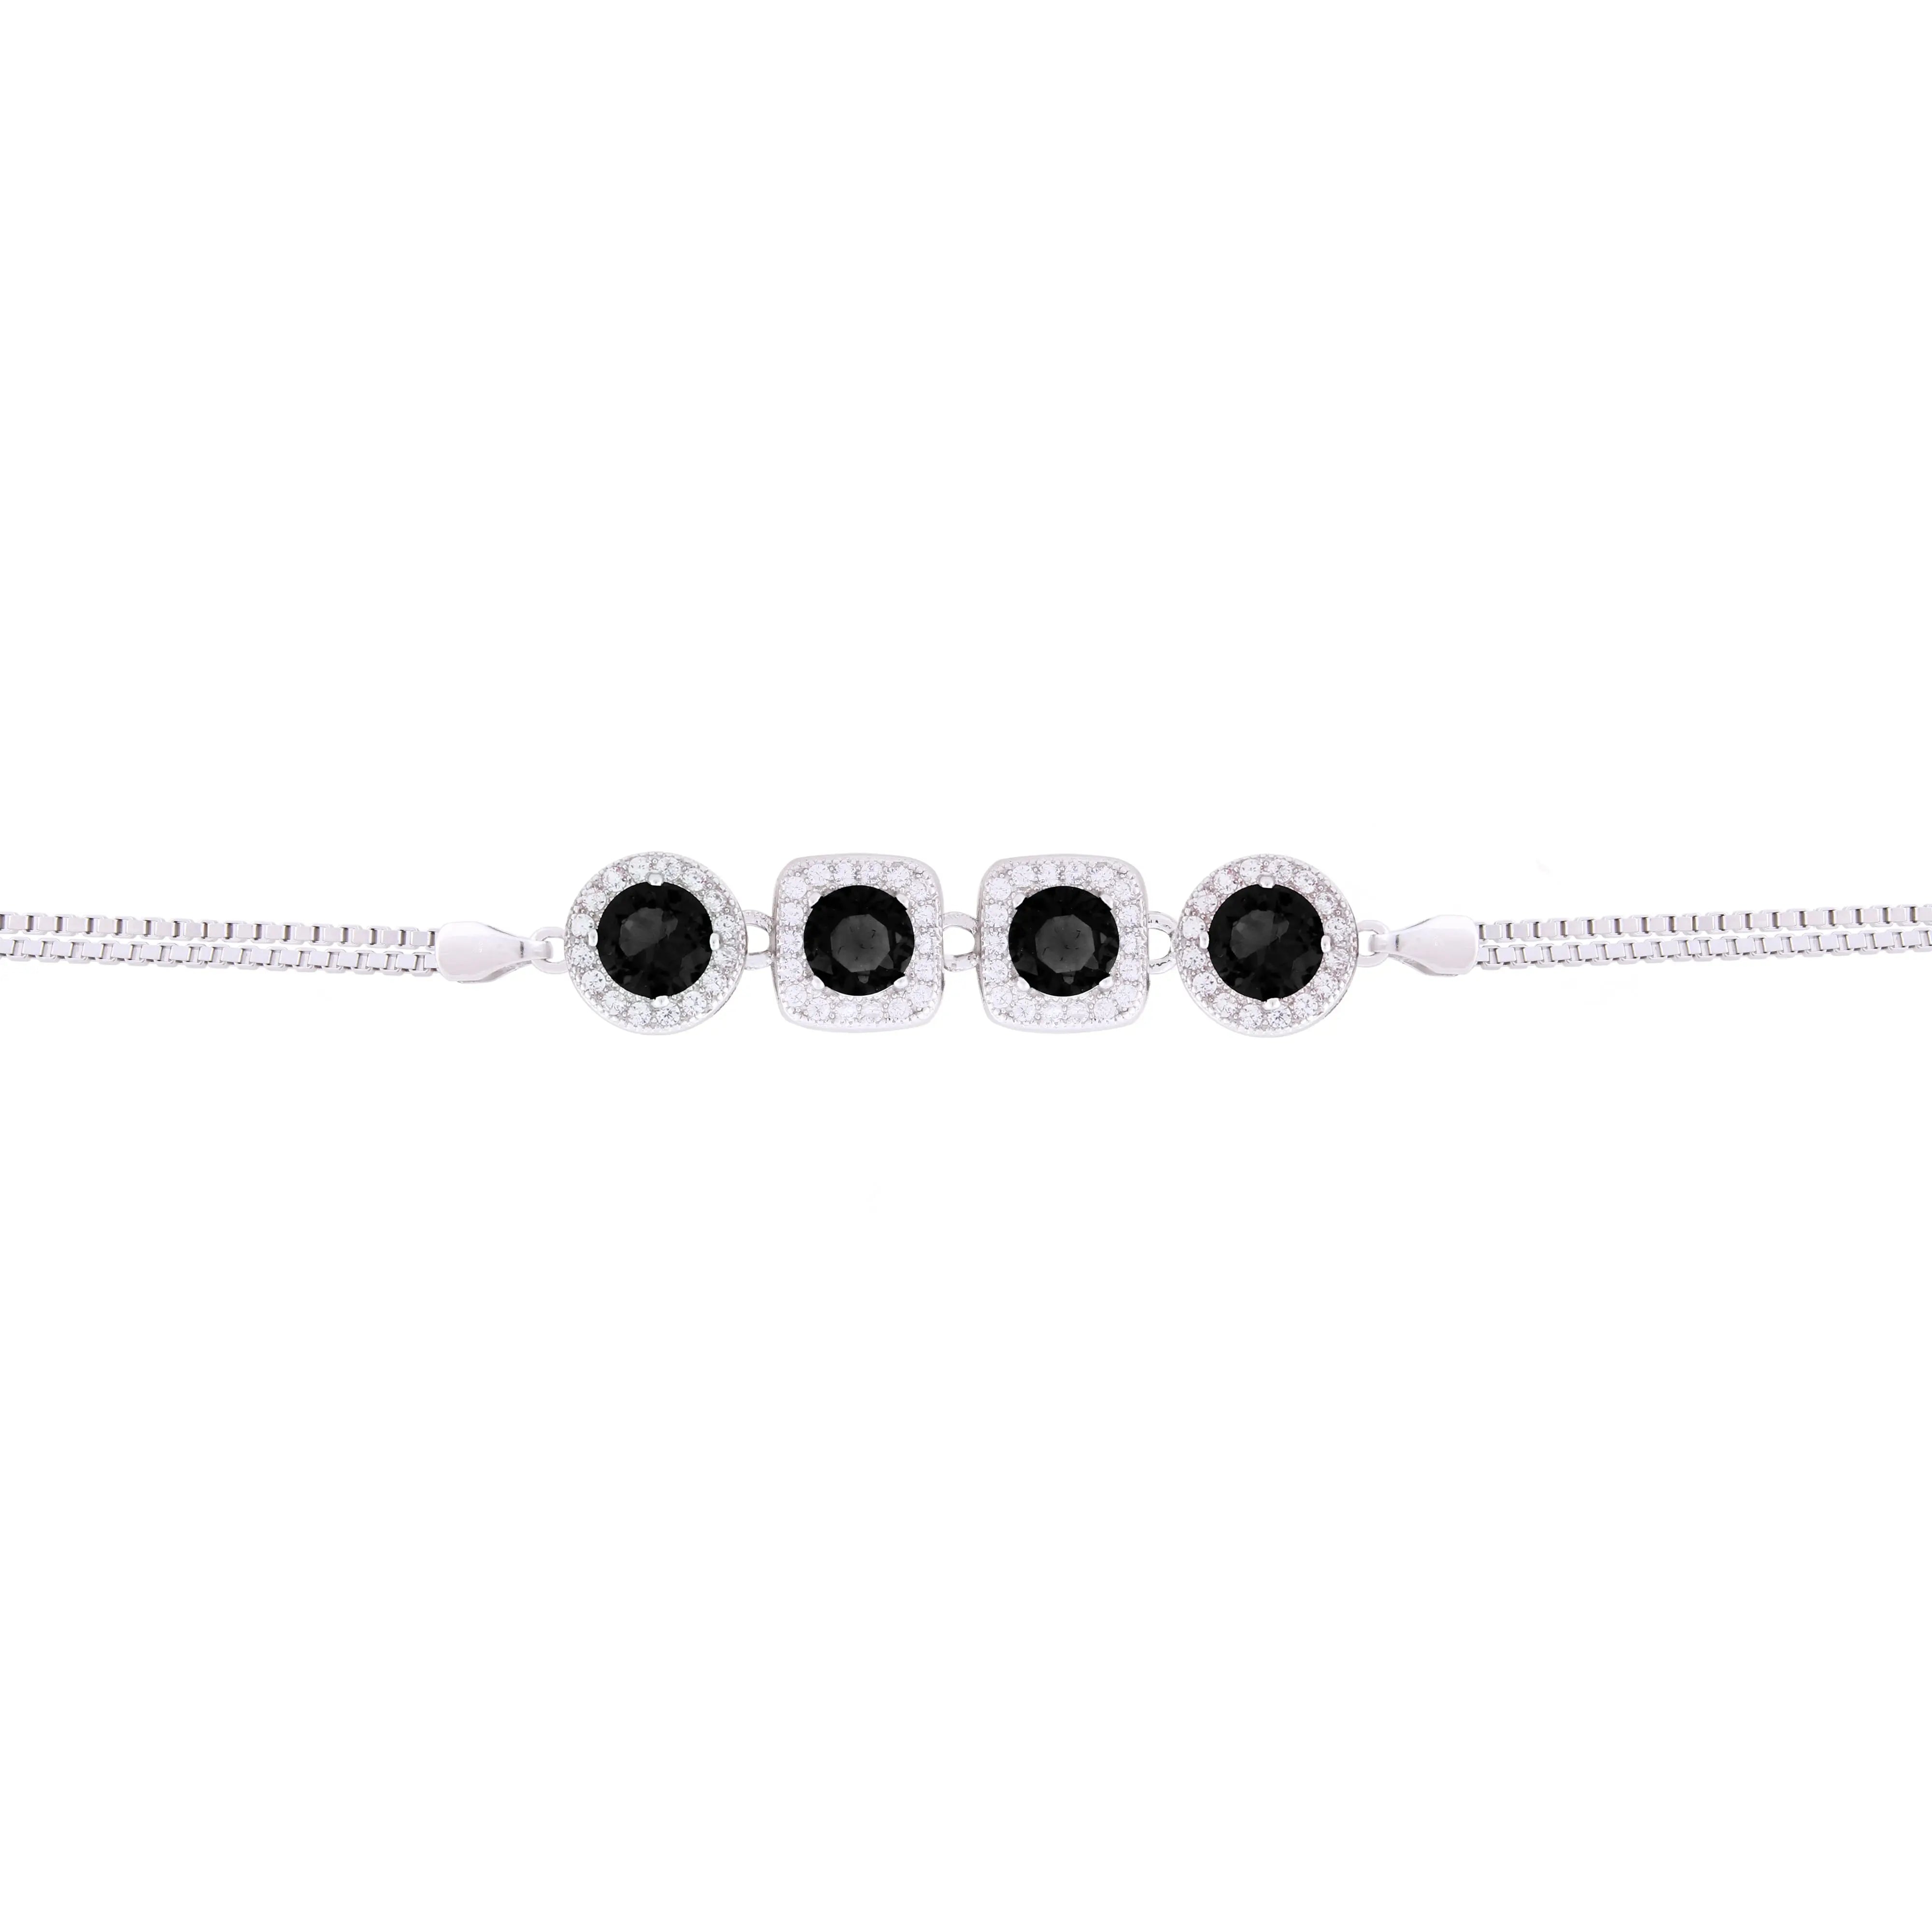 Asfour Box Chain Bracelet With Black Zircon Stones in 925 Sterling Silver